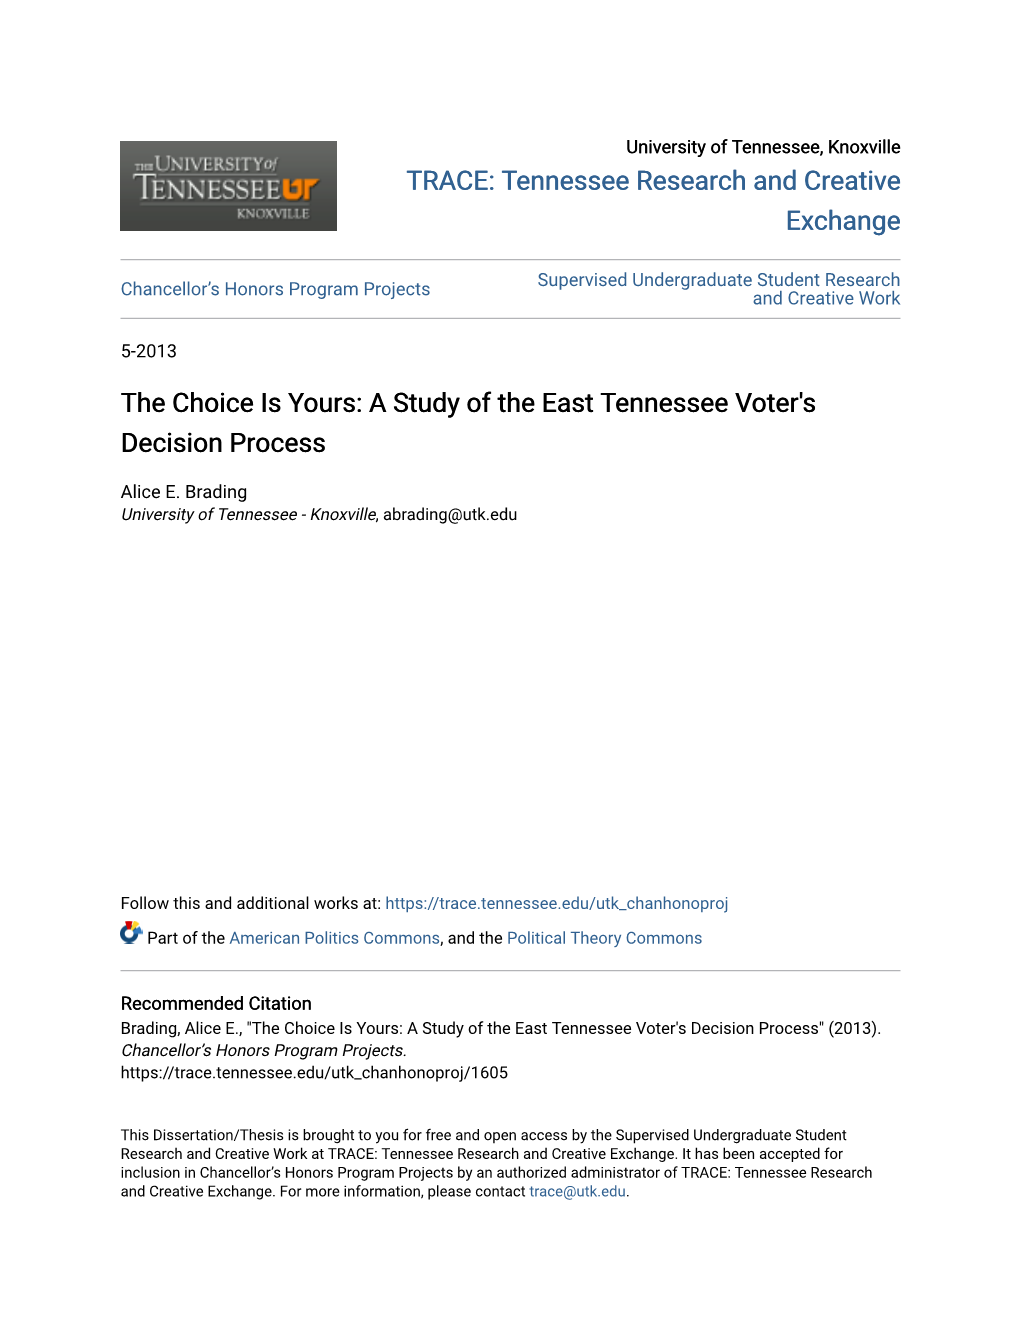 A Study of the East Tennessee Voter's Decision Process